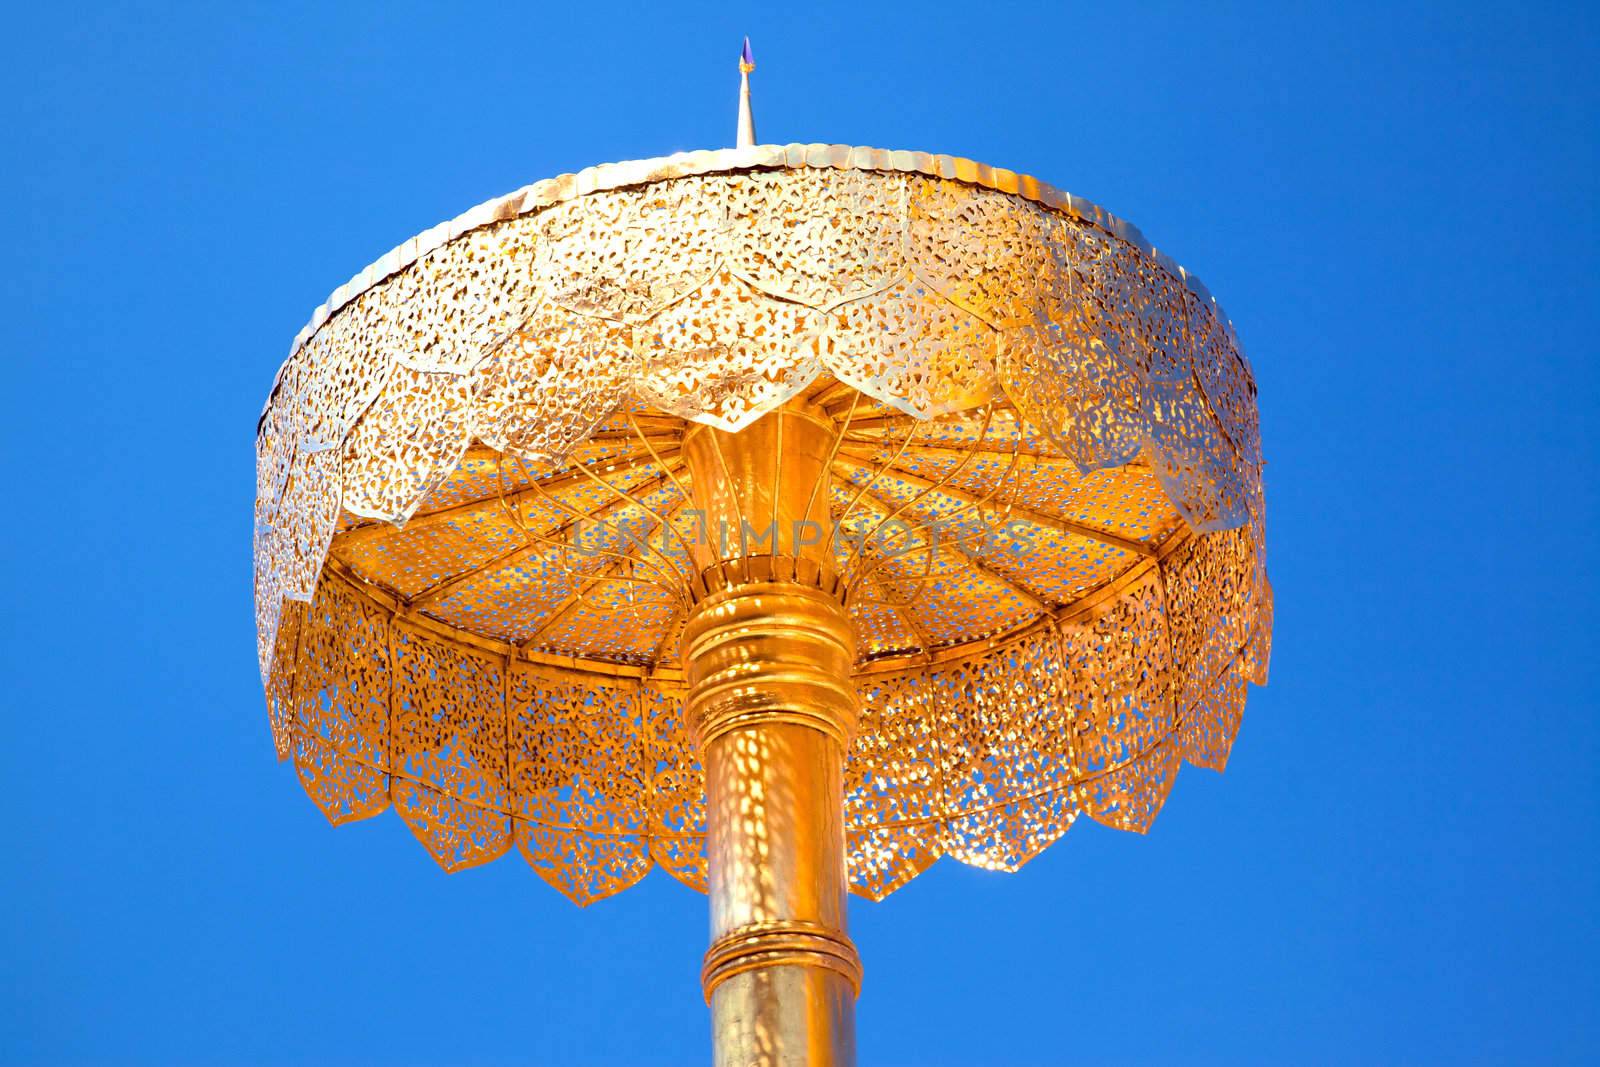 Golden shield against a blue sky by Farina6000